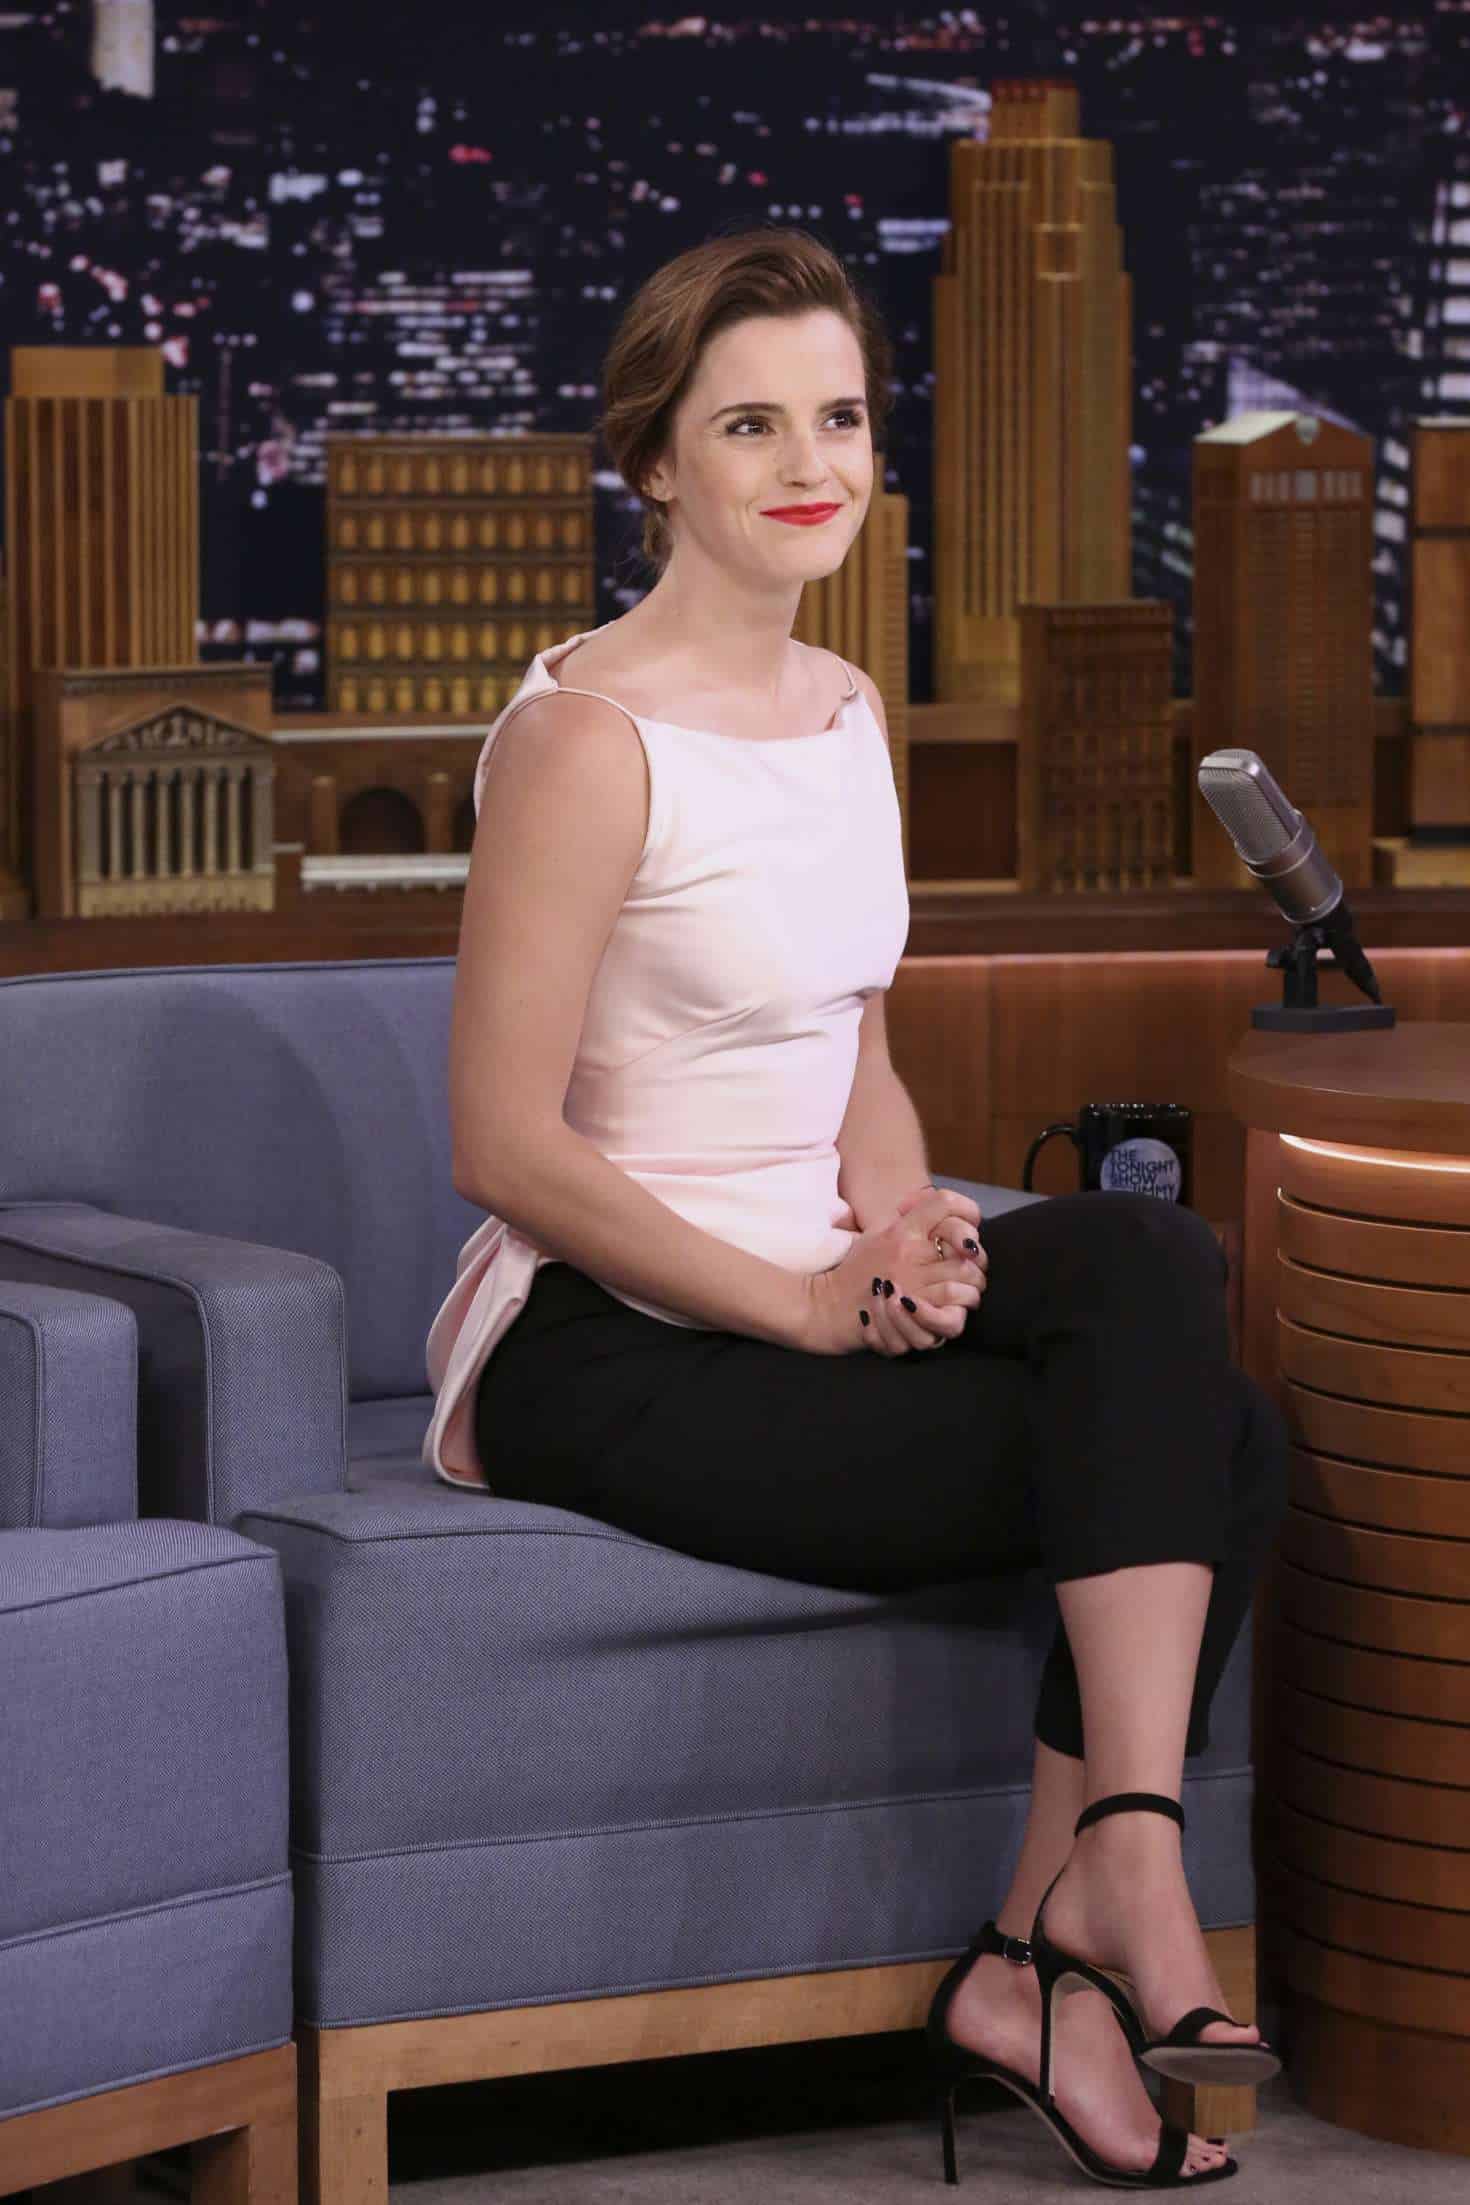 Emma Watson Talks About her Movie “Beauty and the Beast” with Jimmy Fallon